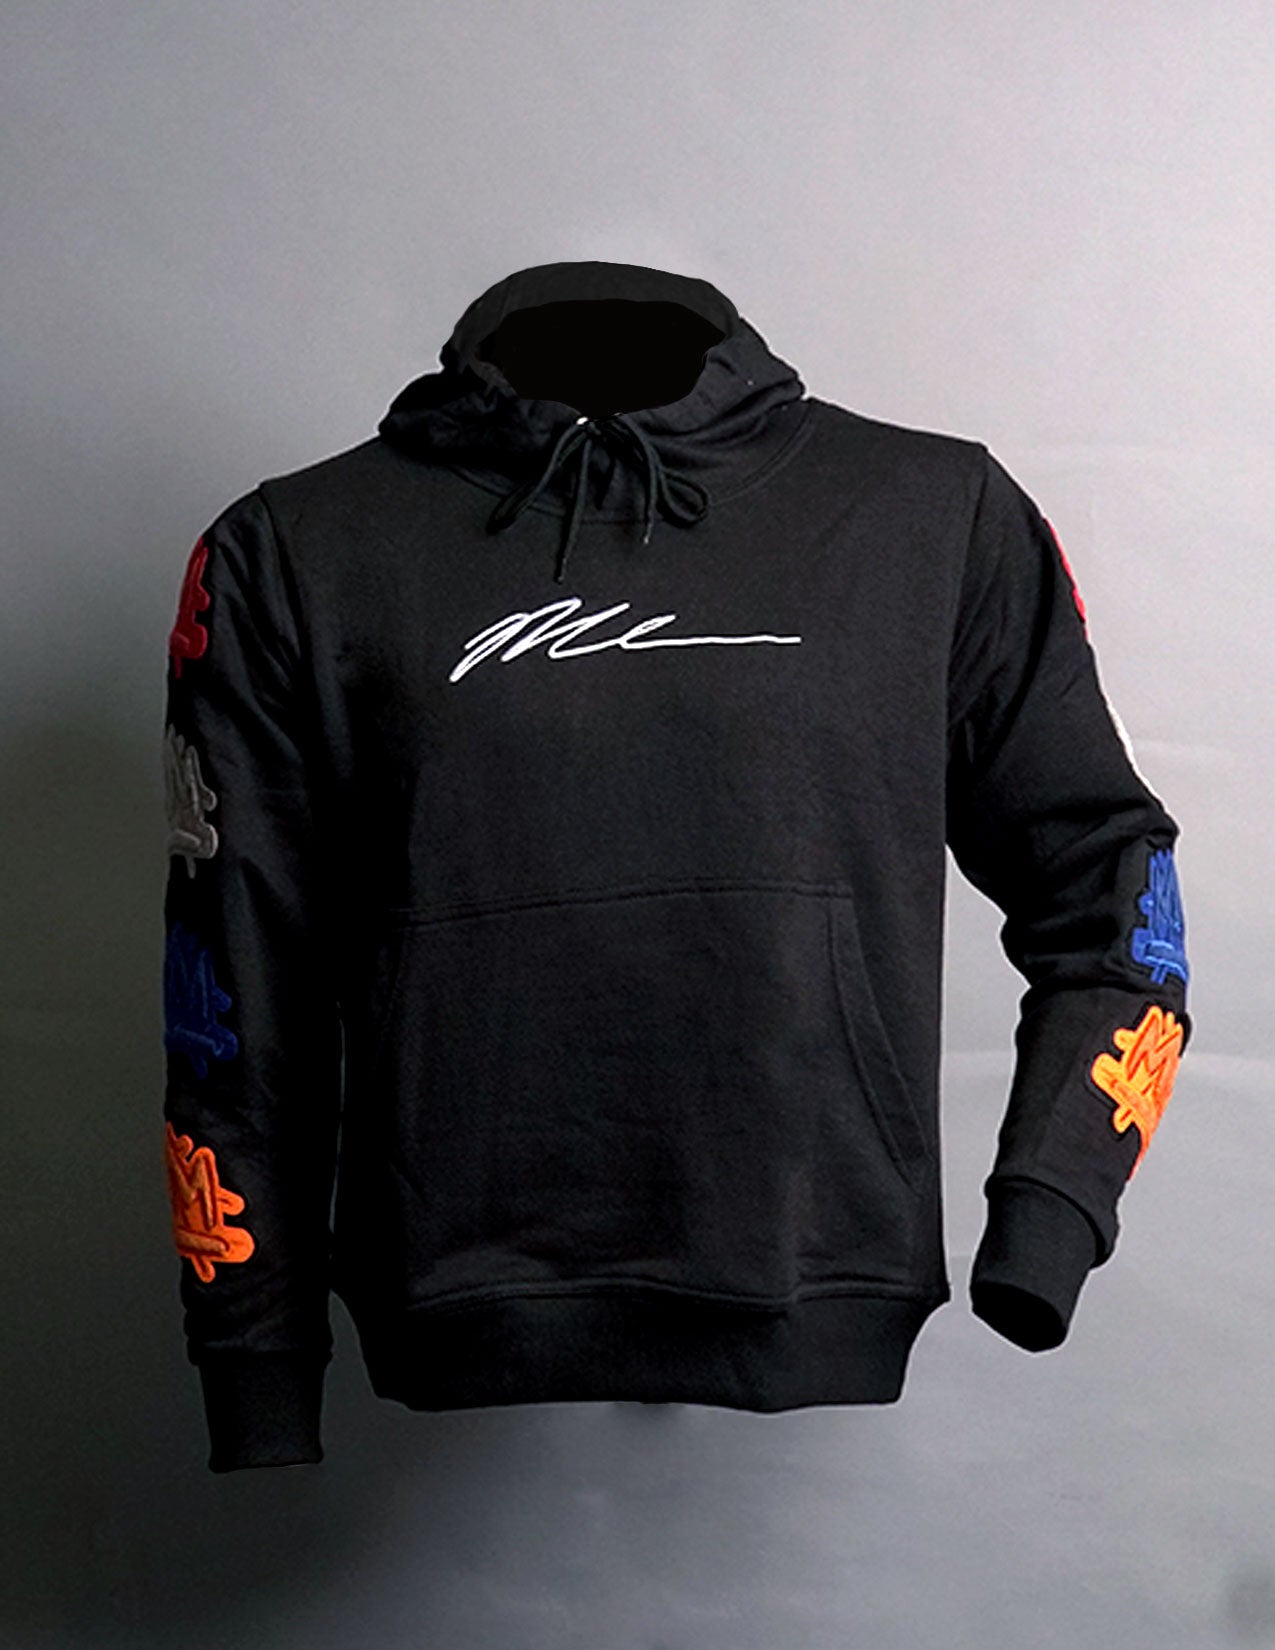 MM Patch Hoodie